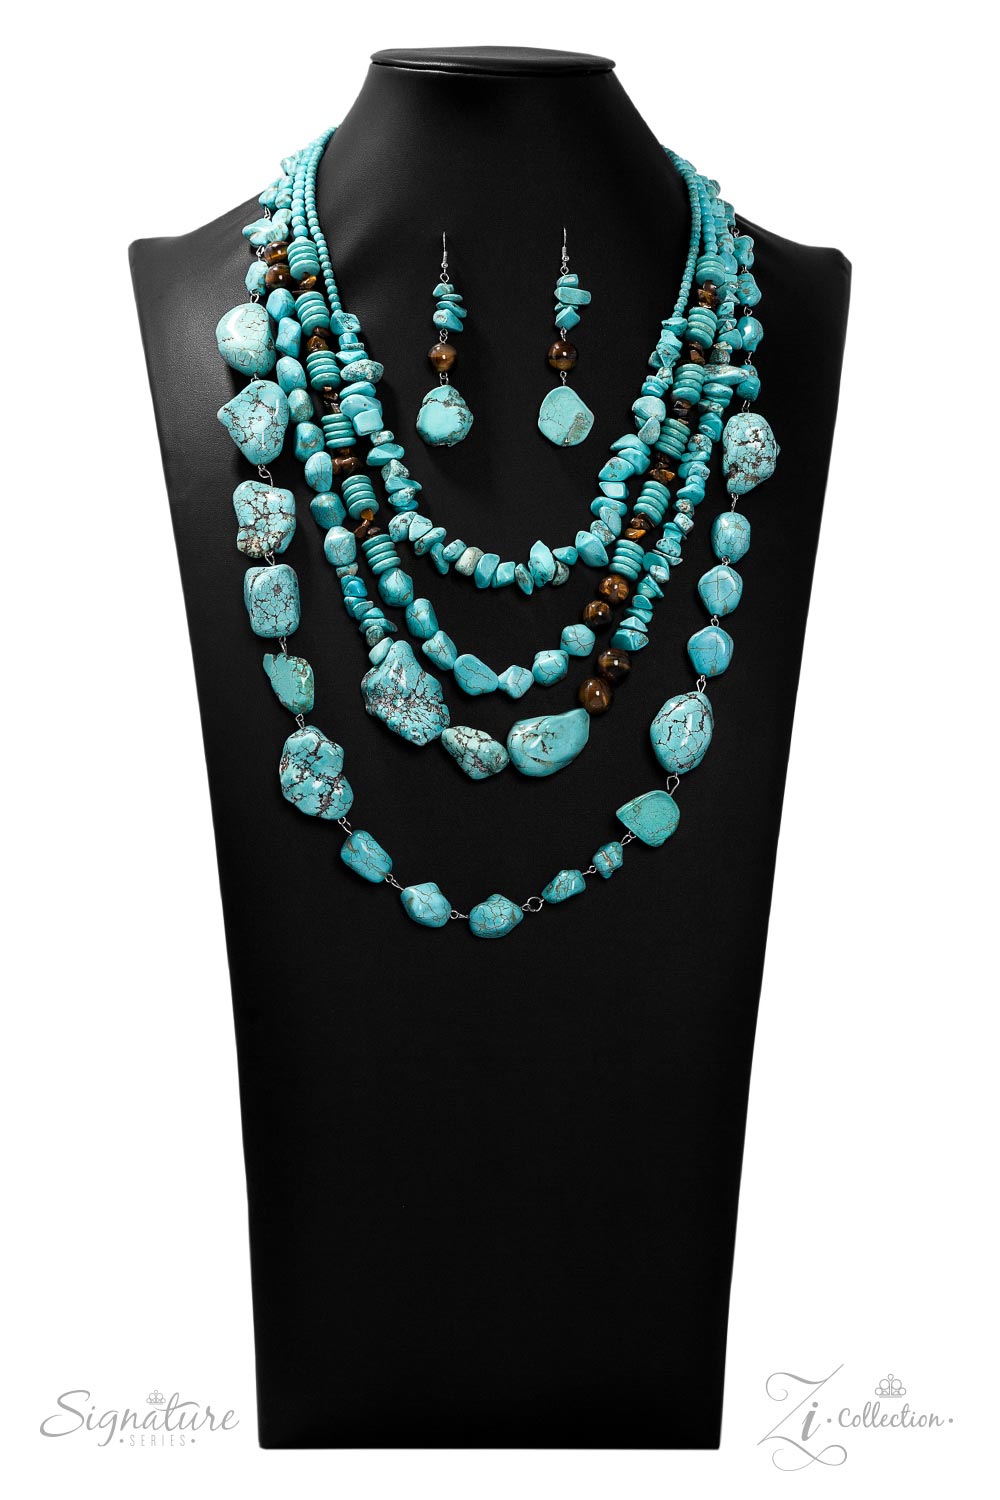 The Monica - Zi Collection - Paparazzi necklace